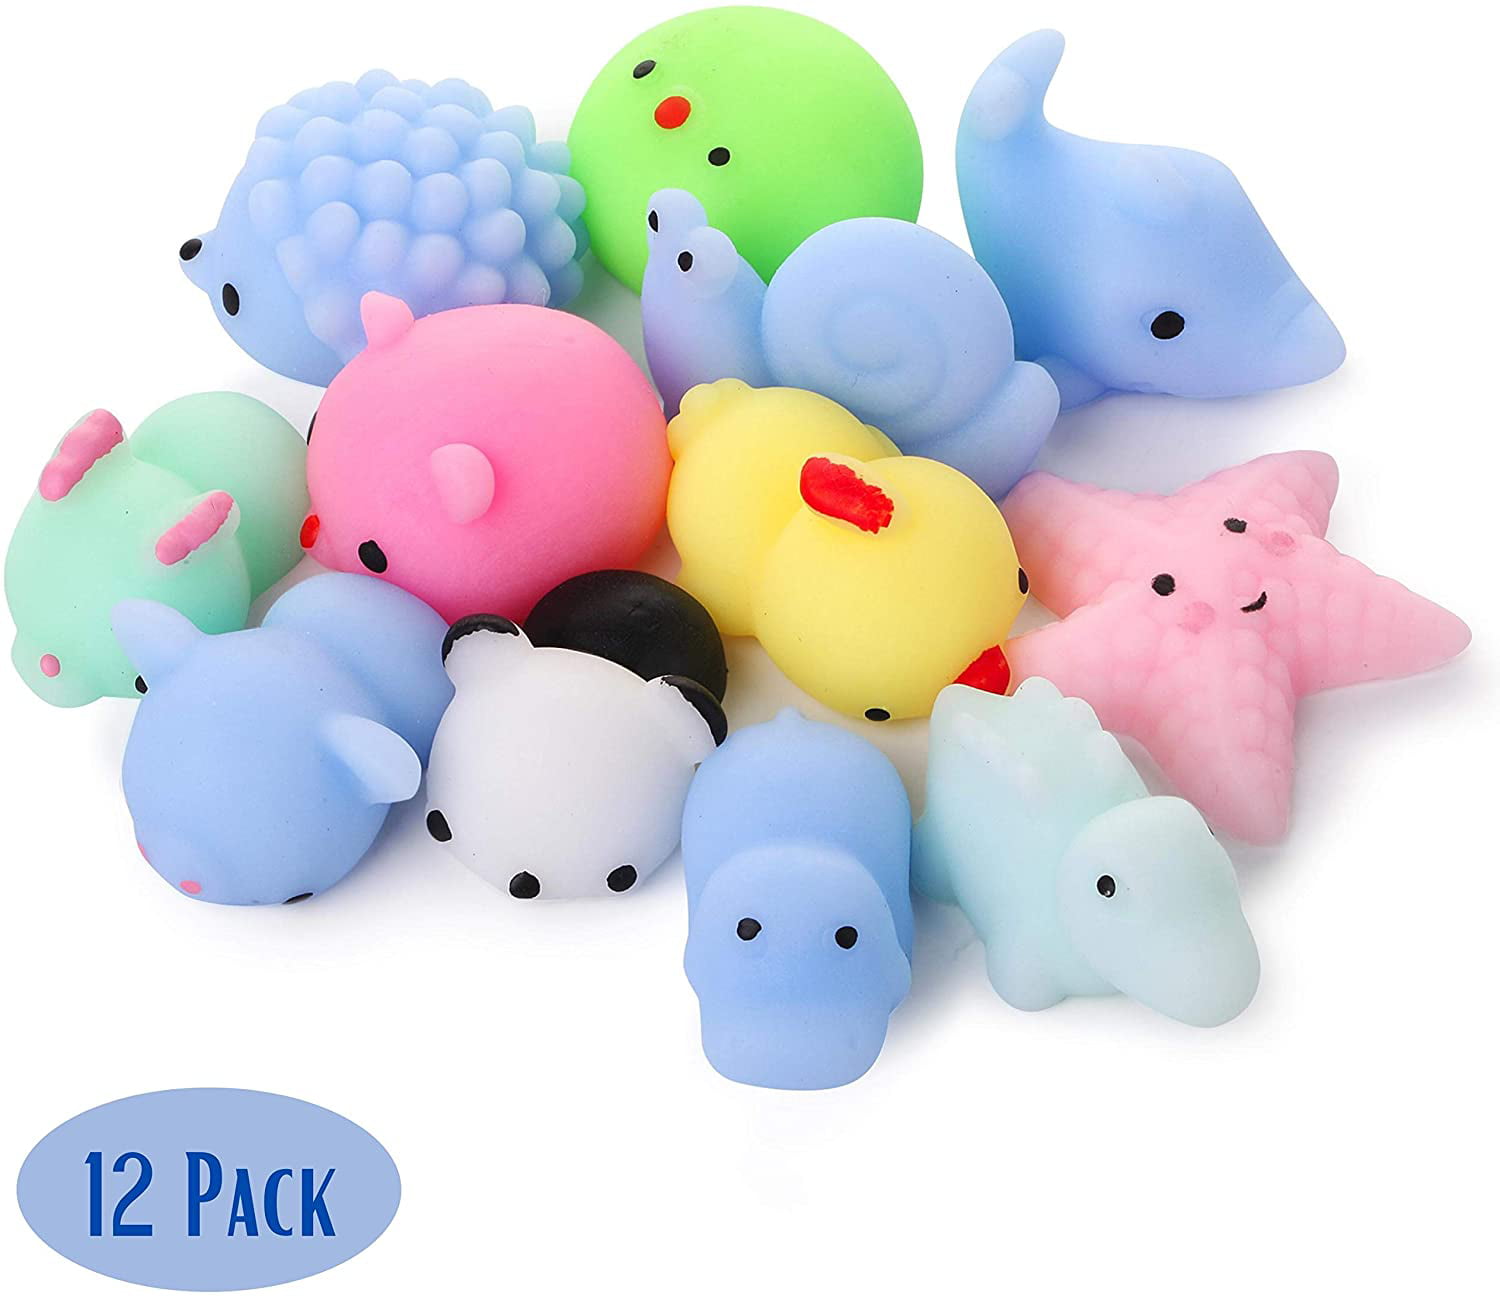 Squishy Toys, Pack, Squishies, Squishy, for Kids, Squishy Toy, Squishy Pack, Squishes, Squishy Animals, Stress Relief Toy, Mini Squishes, Animal Squishies, Small for Kids - Walmart.com